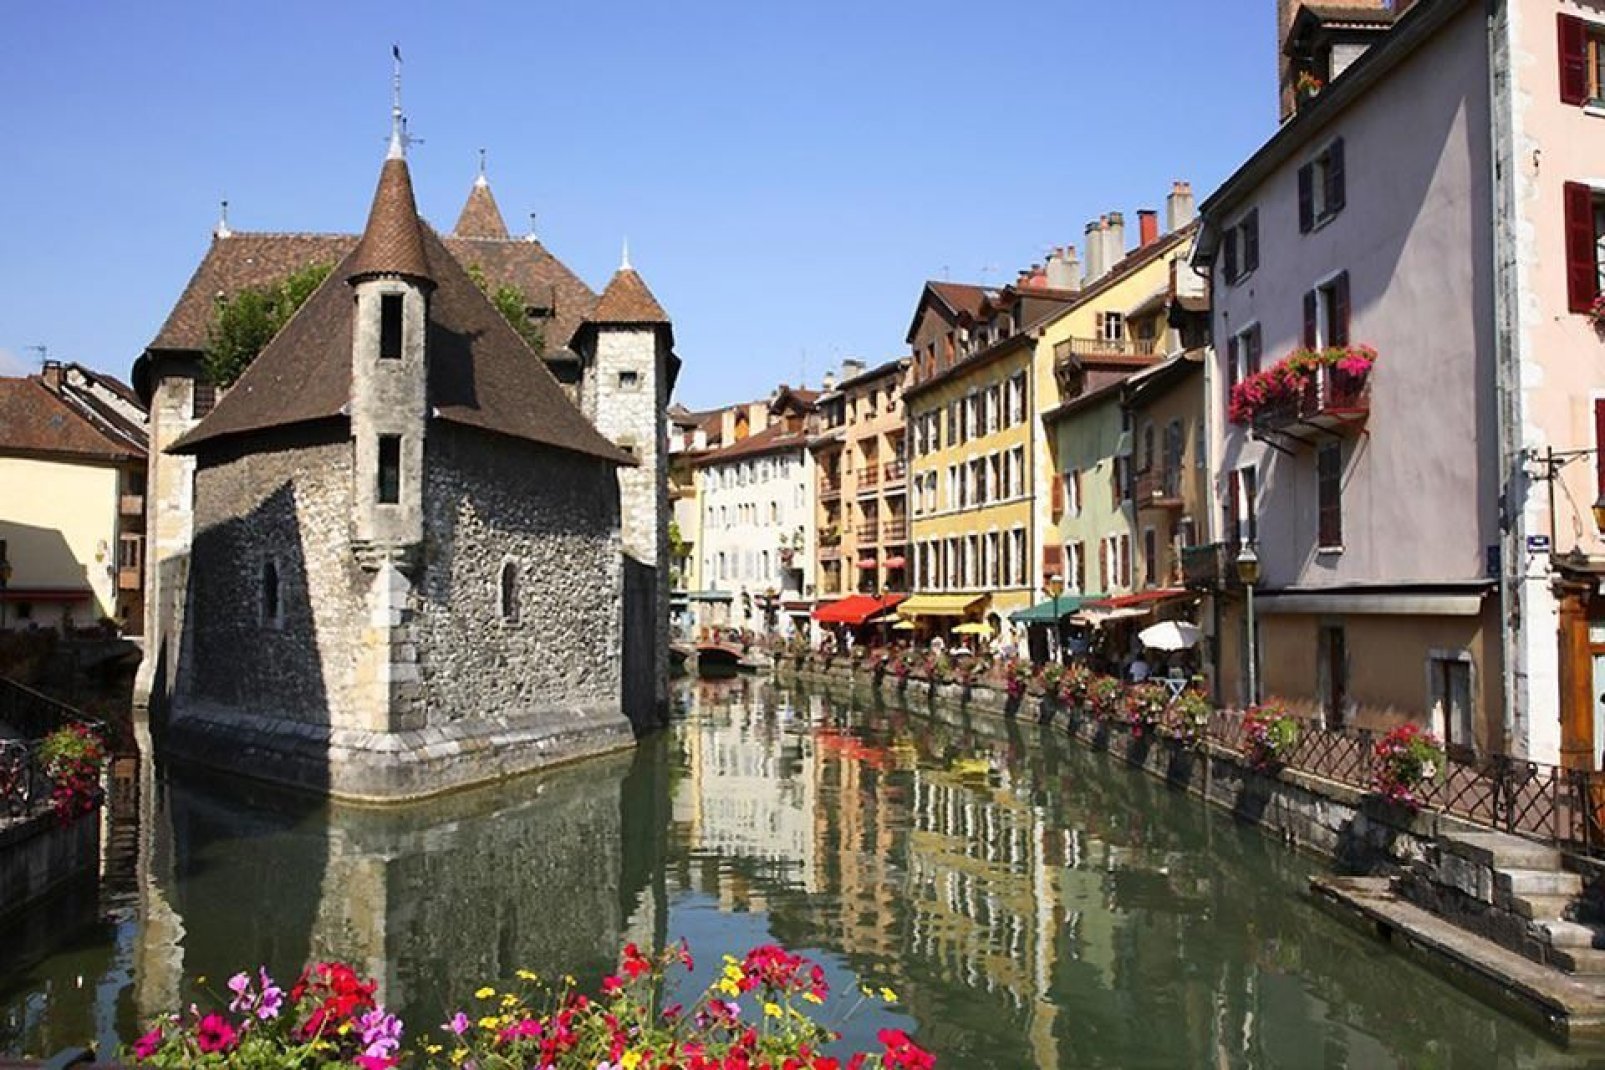 Venice isn't the only city built on water; Annecy also has its gondolas. If it's the irresistible Italian charm you're after, you might be interested to know that Annecy is in fact also known as the Venice of the Savoie region.